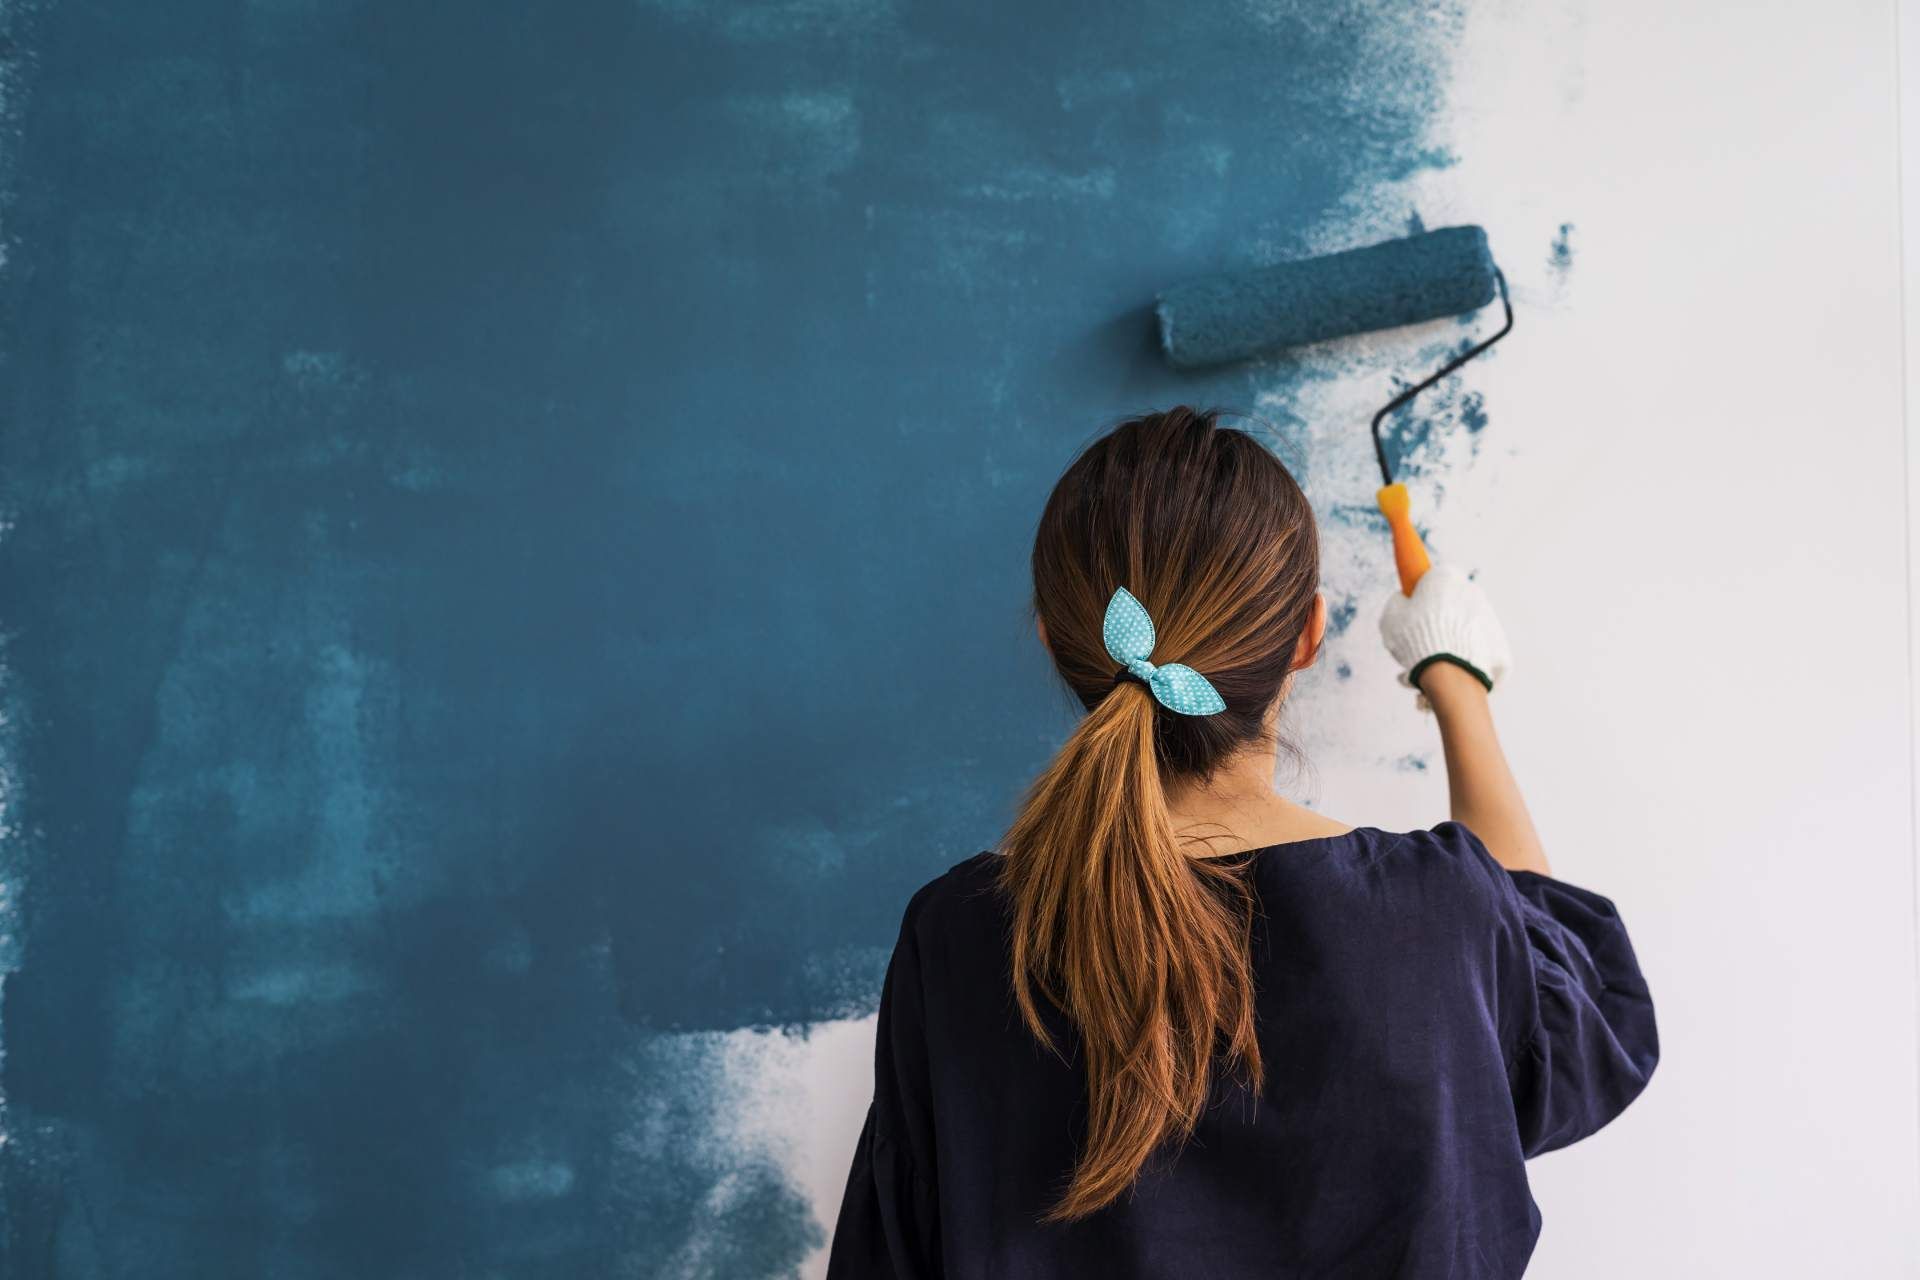 Image of a person painting a spackled wall